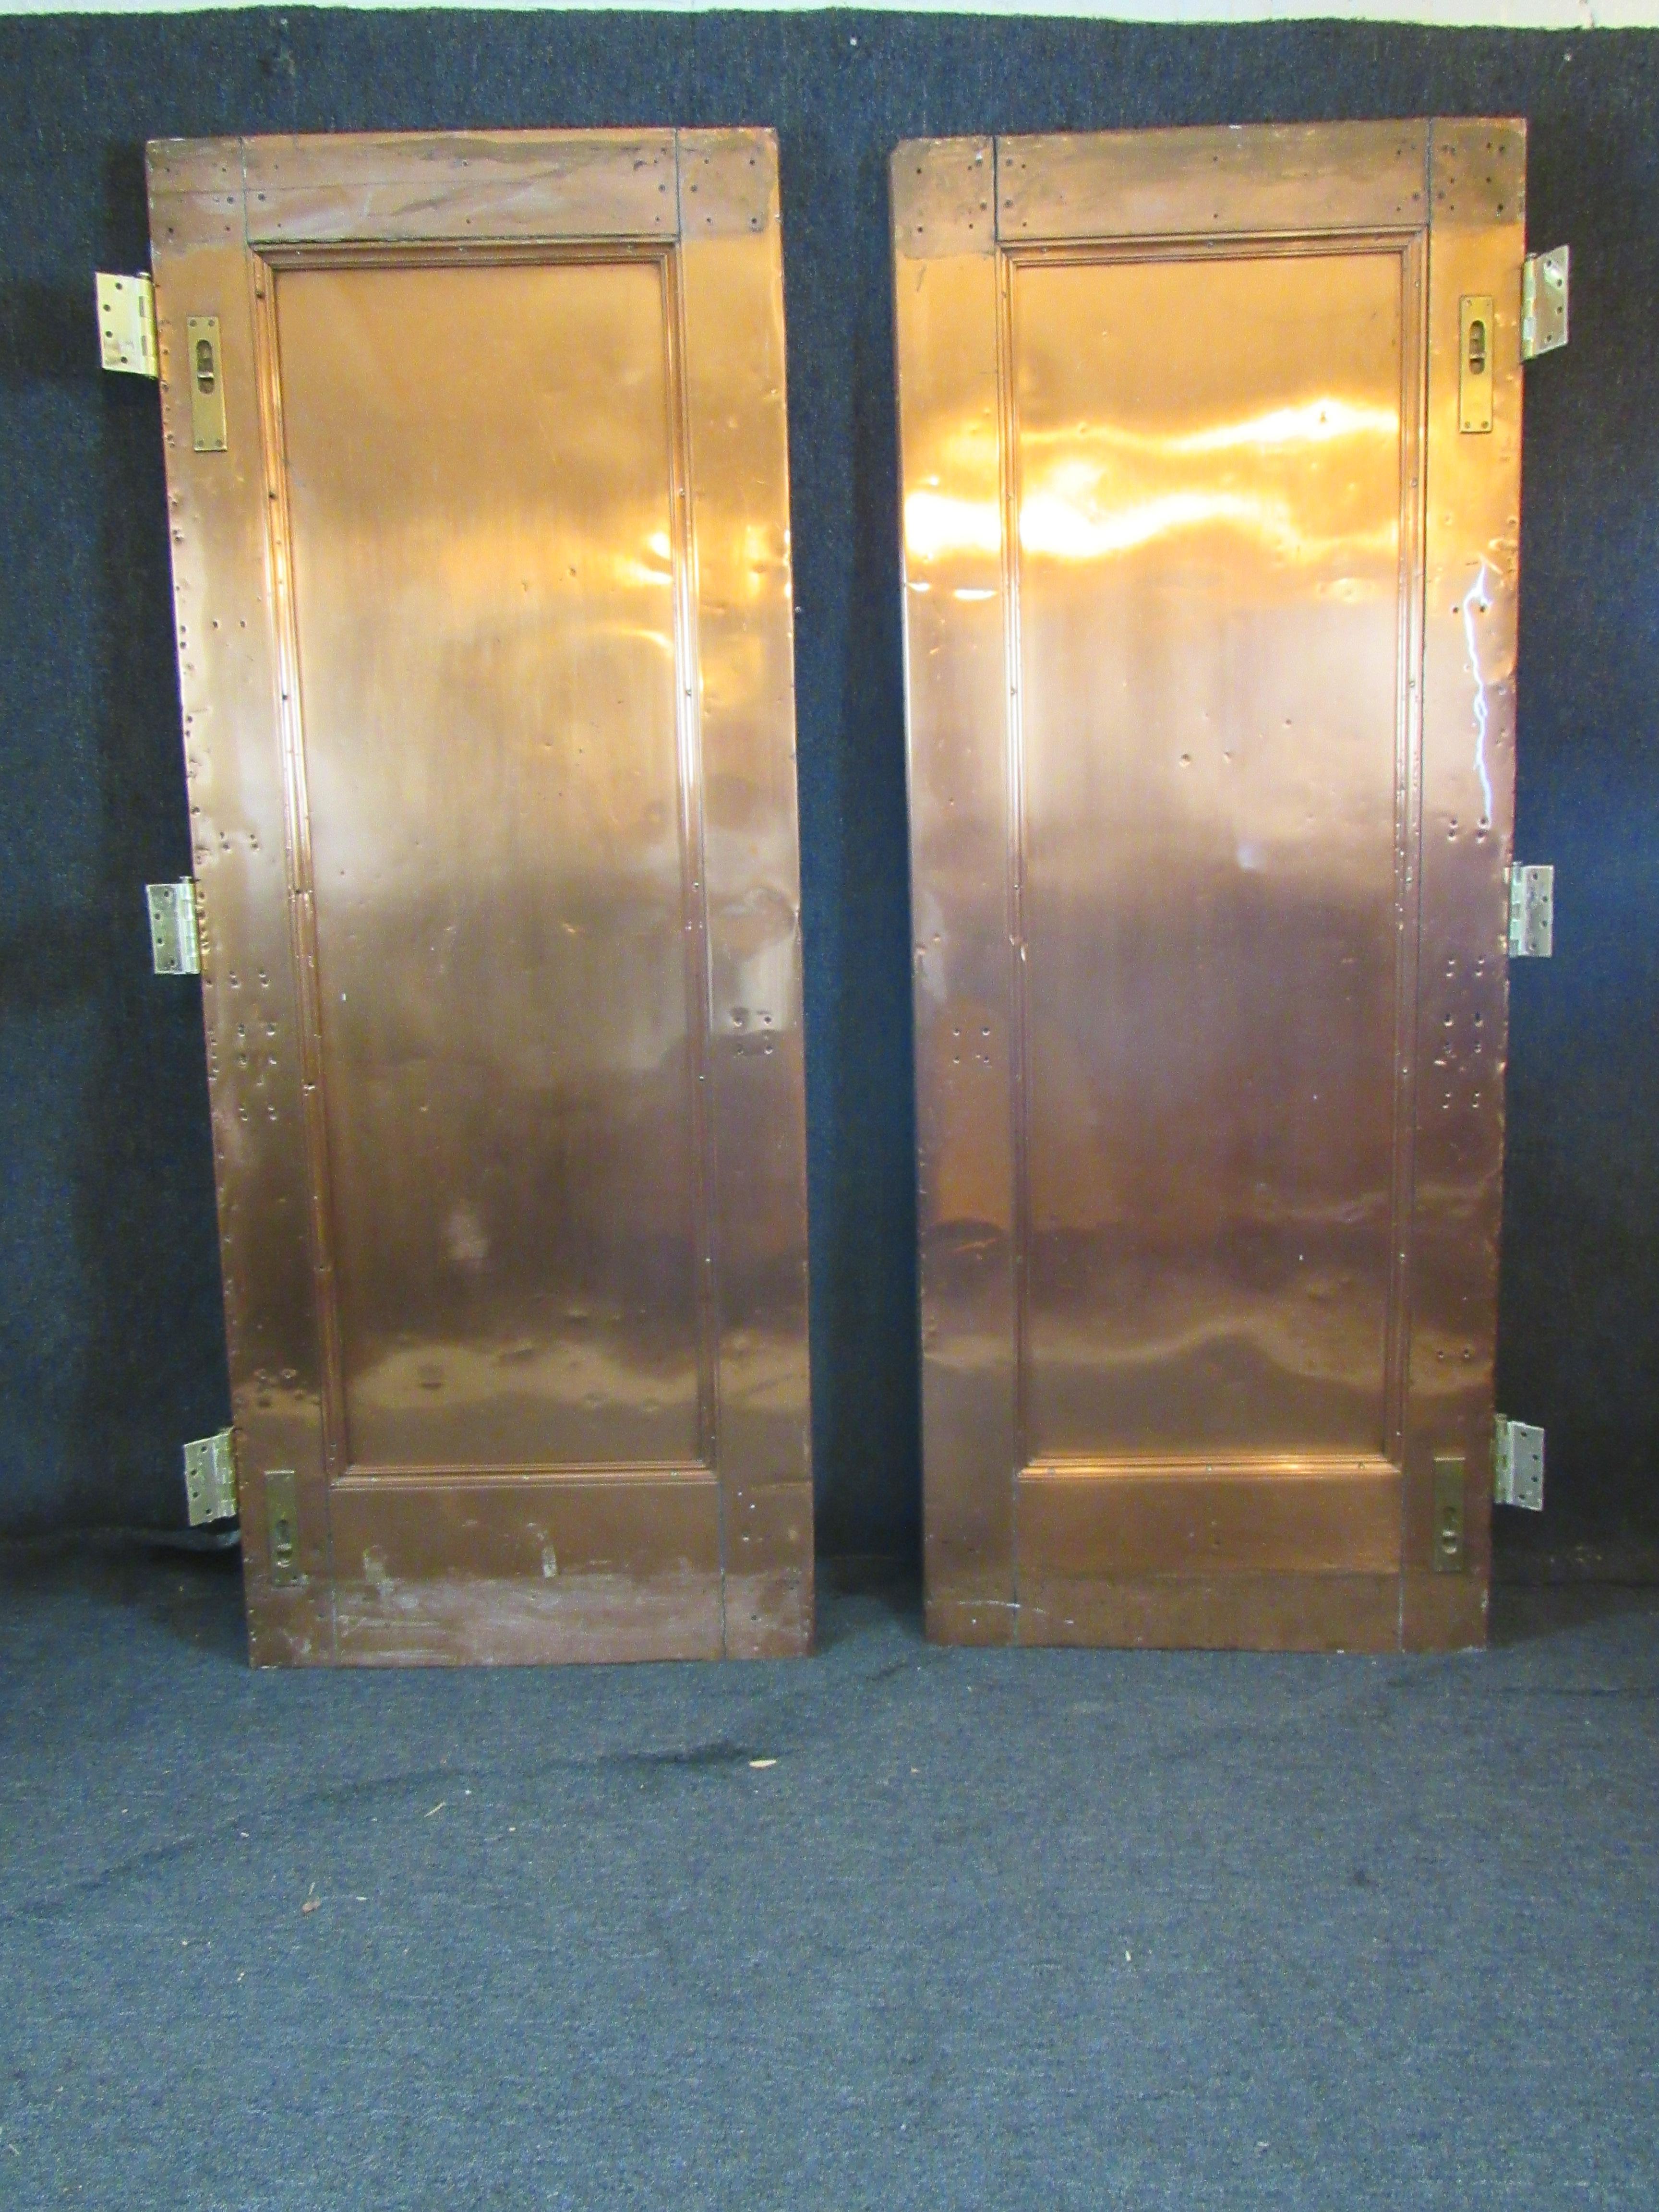 Make your home the talk of the town with these truly one-of-a-kind vintage custom copper plated doors! Standing nearly 80